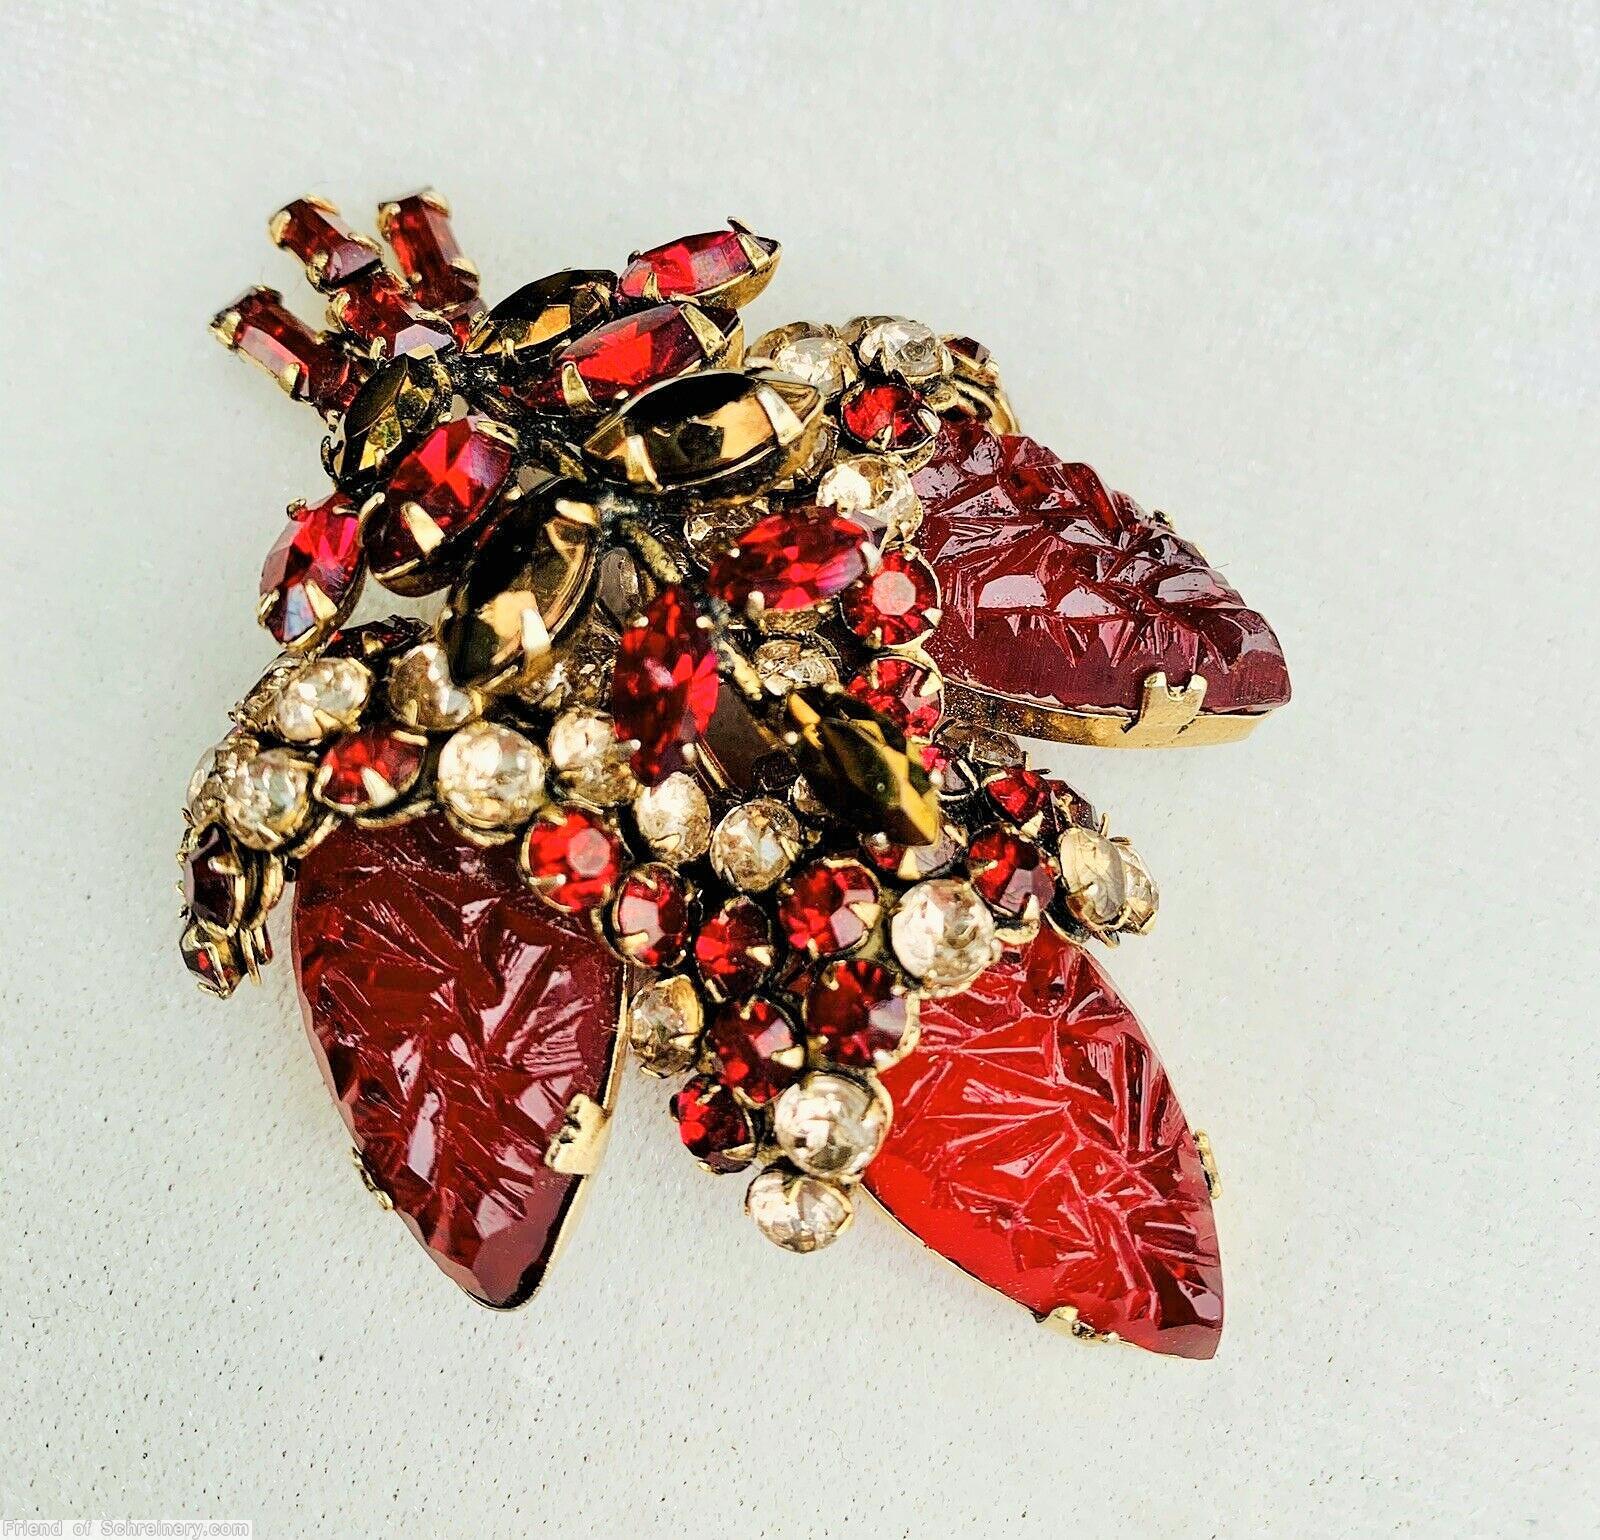 Schreiner 3 acorn bunch pin large faceted teardrop stone siam red large molded teardrop metalic brown navette crystal jewelry